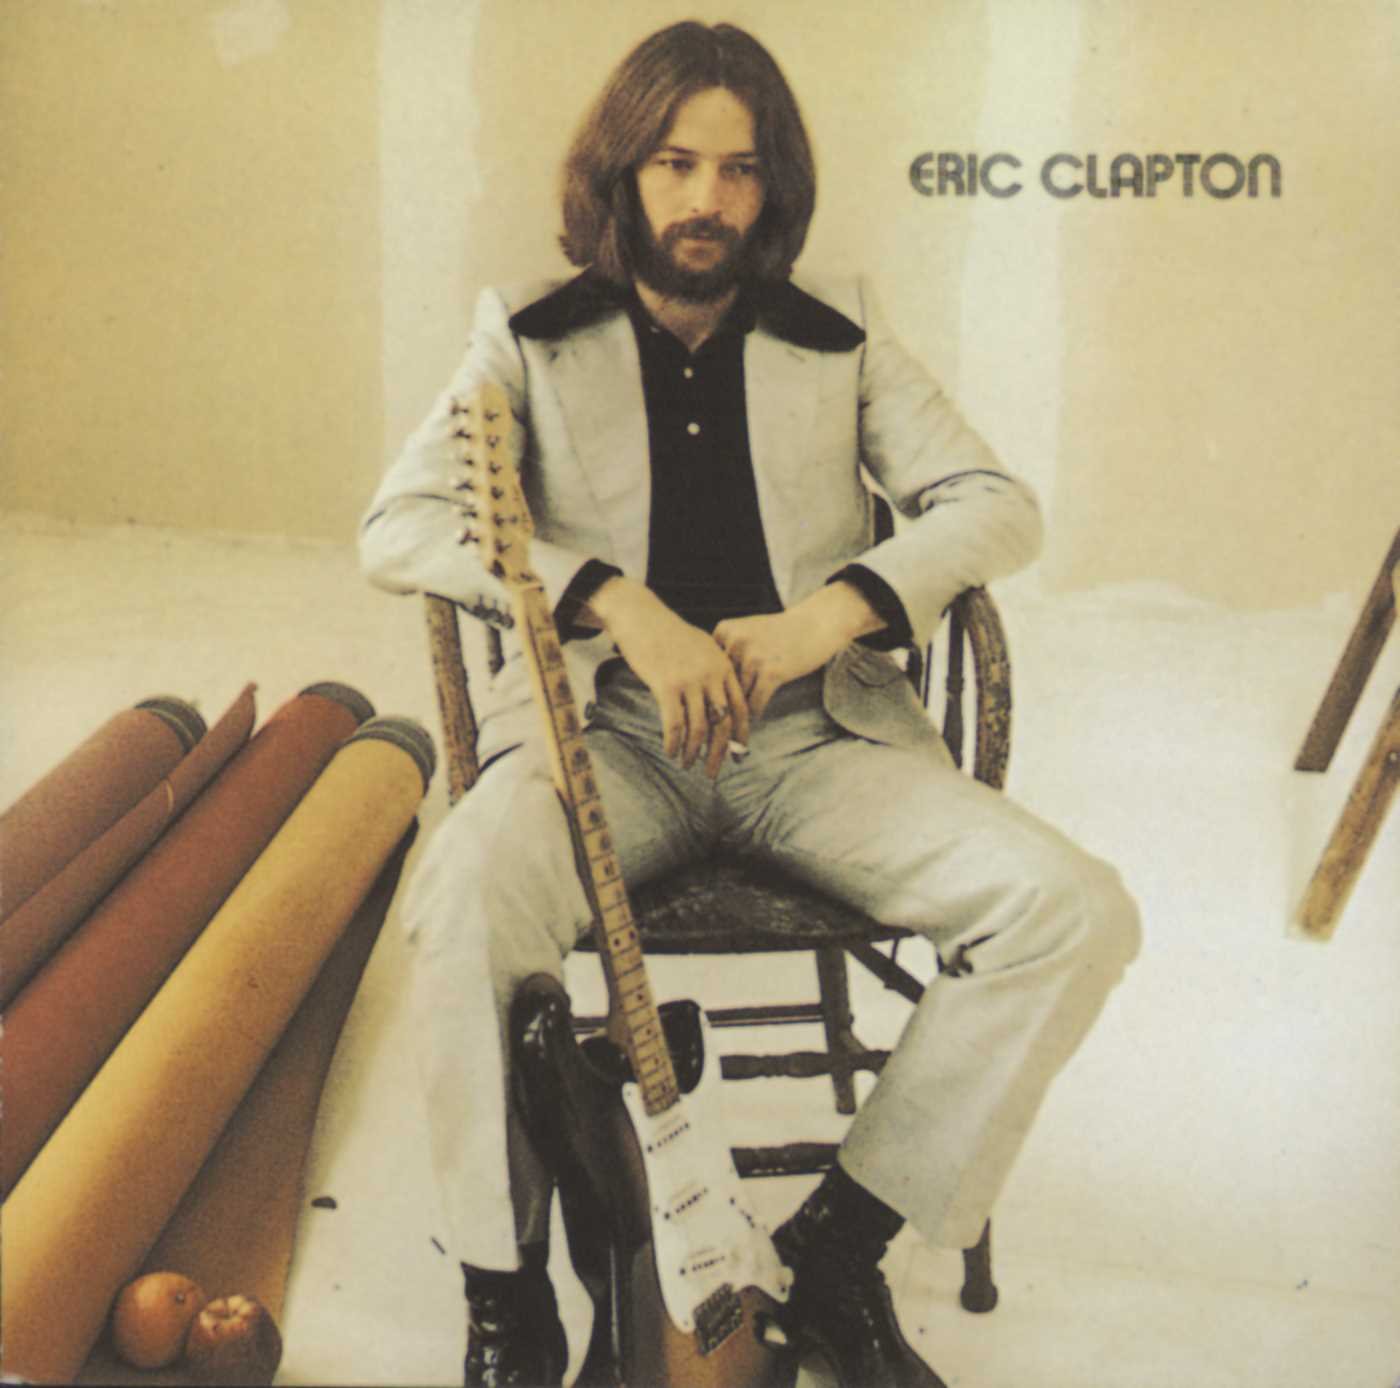 Crossroads of Rock: Celebrating Eric Clapton's Birthday and Blues Legacy